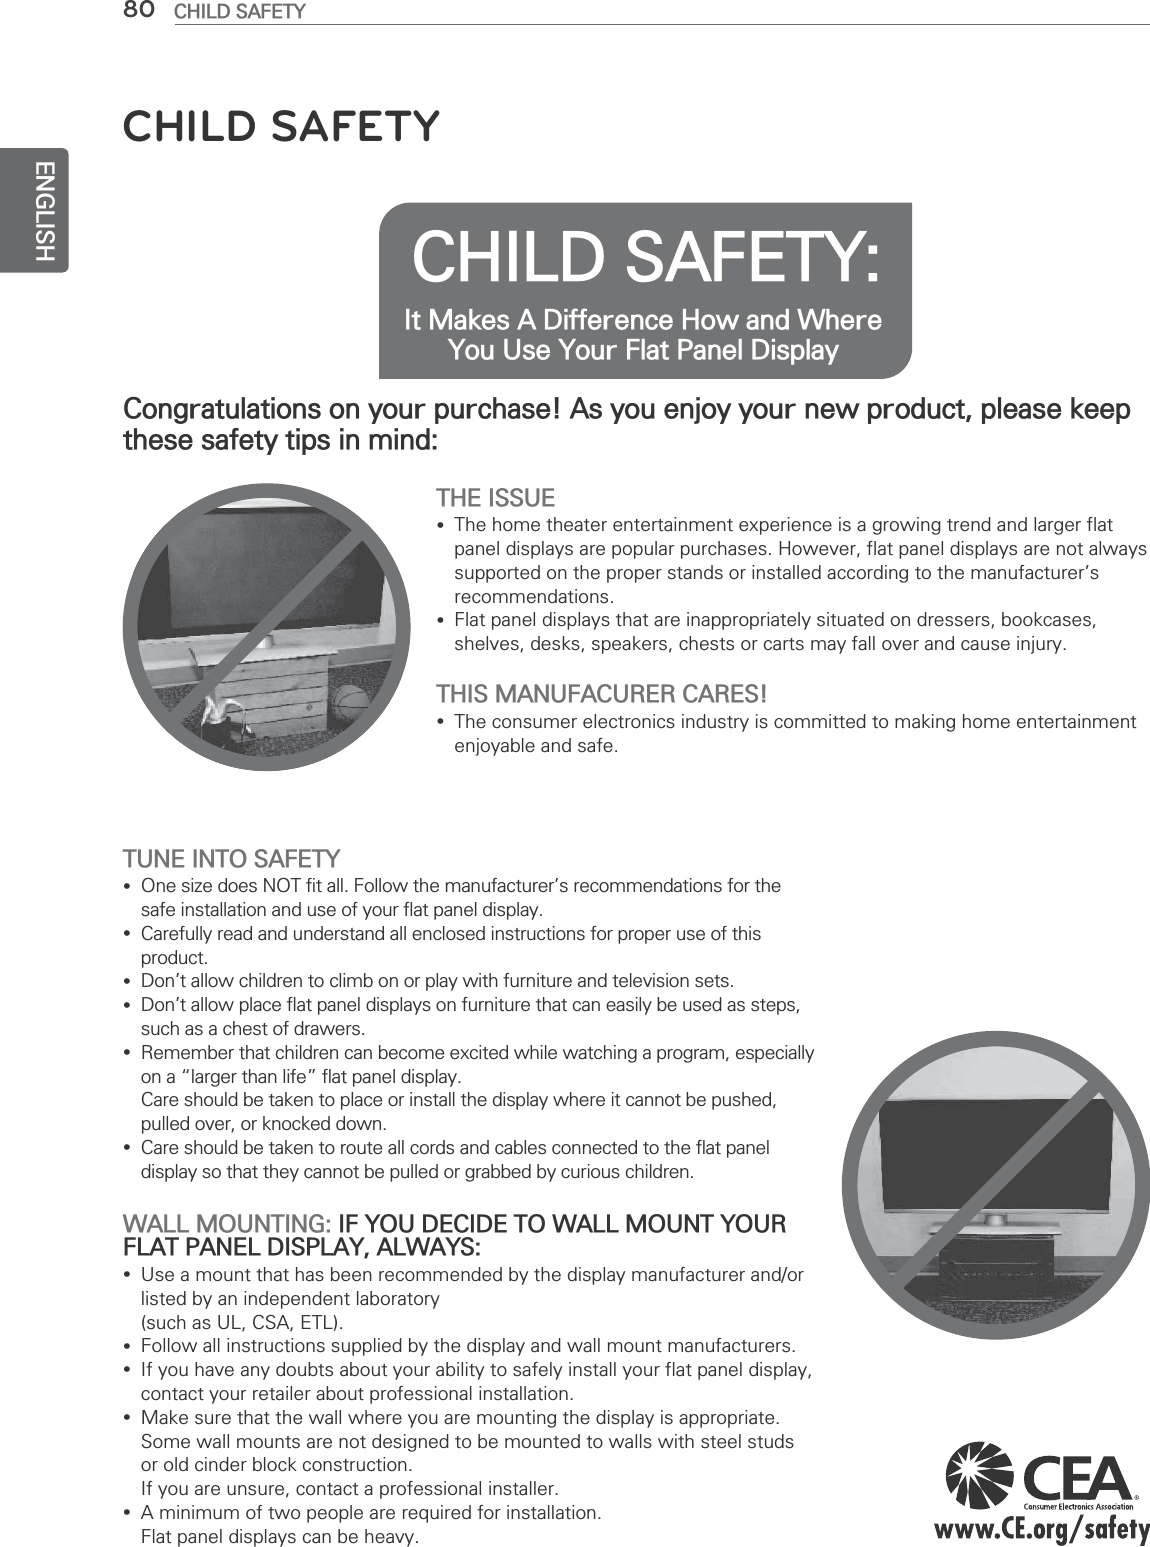 ENGLISH80 CHILD SAFETYCHILD SAFETY: It Makes A Difference How and Where You Use Your Flat Panel DisplayCongratulations on your purchase! As you enjoy your new product, please keep these safety tips in mind:THE ISSUE yThe home theater entertainment experience is a growing trend and larger flat panel displays are popular purchases. However, flat panel displays are not always supported on the proper stands or installed according to the manufacturer’s recommendations. yFlat panel displays that are inappropriately situated on dressers, bookcases, shelves, desks, speakers, chests or carts may fall over and cause injury.THIS MANUFACURER CARES! yThe consumer electronics industry is committed to making home entertainment enjoyable and safe.TUNE INTO SAFETY yOne size does NOT fit all. Follow the manufacturer’s recommendations for the safe installation and use of your flat panel display. yCarefully read and understand all enclosed instructions for proper use of this product. yDon’t allow children to climb on or play with furniture and television sets. yDon’t allow place flat panel displays on furniture that can easily be used as steps, such as a chest of drawers. yRemember that children can become excited while watching a program, especially on a “larger than life” flat panel display.  Care should be taken to place or install the display where it cannot be pushed, pulled over, or knocked down. yCare should be taken to route all cords and cables connected to the flat panel display so that they cannot be pulled or grabbed by curious children.WALL MOUNTING: IF YOU DECIDE TO WALL MOUNT YOUR FLAT PANEL DISPLAY, ALWAYS: yUse a mount that has been recommended by the display manufacturer and/or listed by an independent laboratory  (such as UL, CSA, ETL). yFollow all instructions supplied by the display and wall mount manufacturers. yIf you have any doubts about your ability to safely install your flat panel display, contact your retailer about professional installation. yMake sure that the wall where you are mounting the display is appropriate. Some wall mounts are not designed to be mounted to walls with steel studs or old cinder block construction.  If you are unsure, contact a professional installer. yA minimum of two people are required for installation.  Flat panel displays can be heavy.CHILD SAFETY